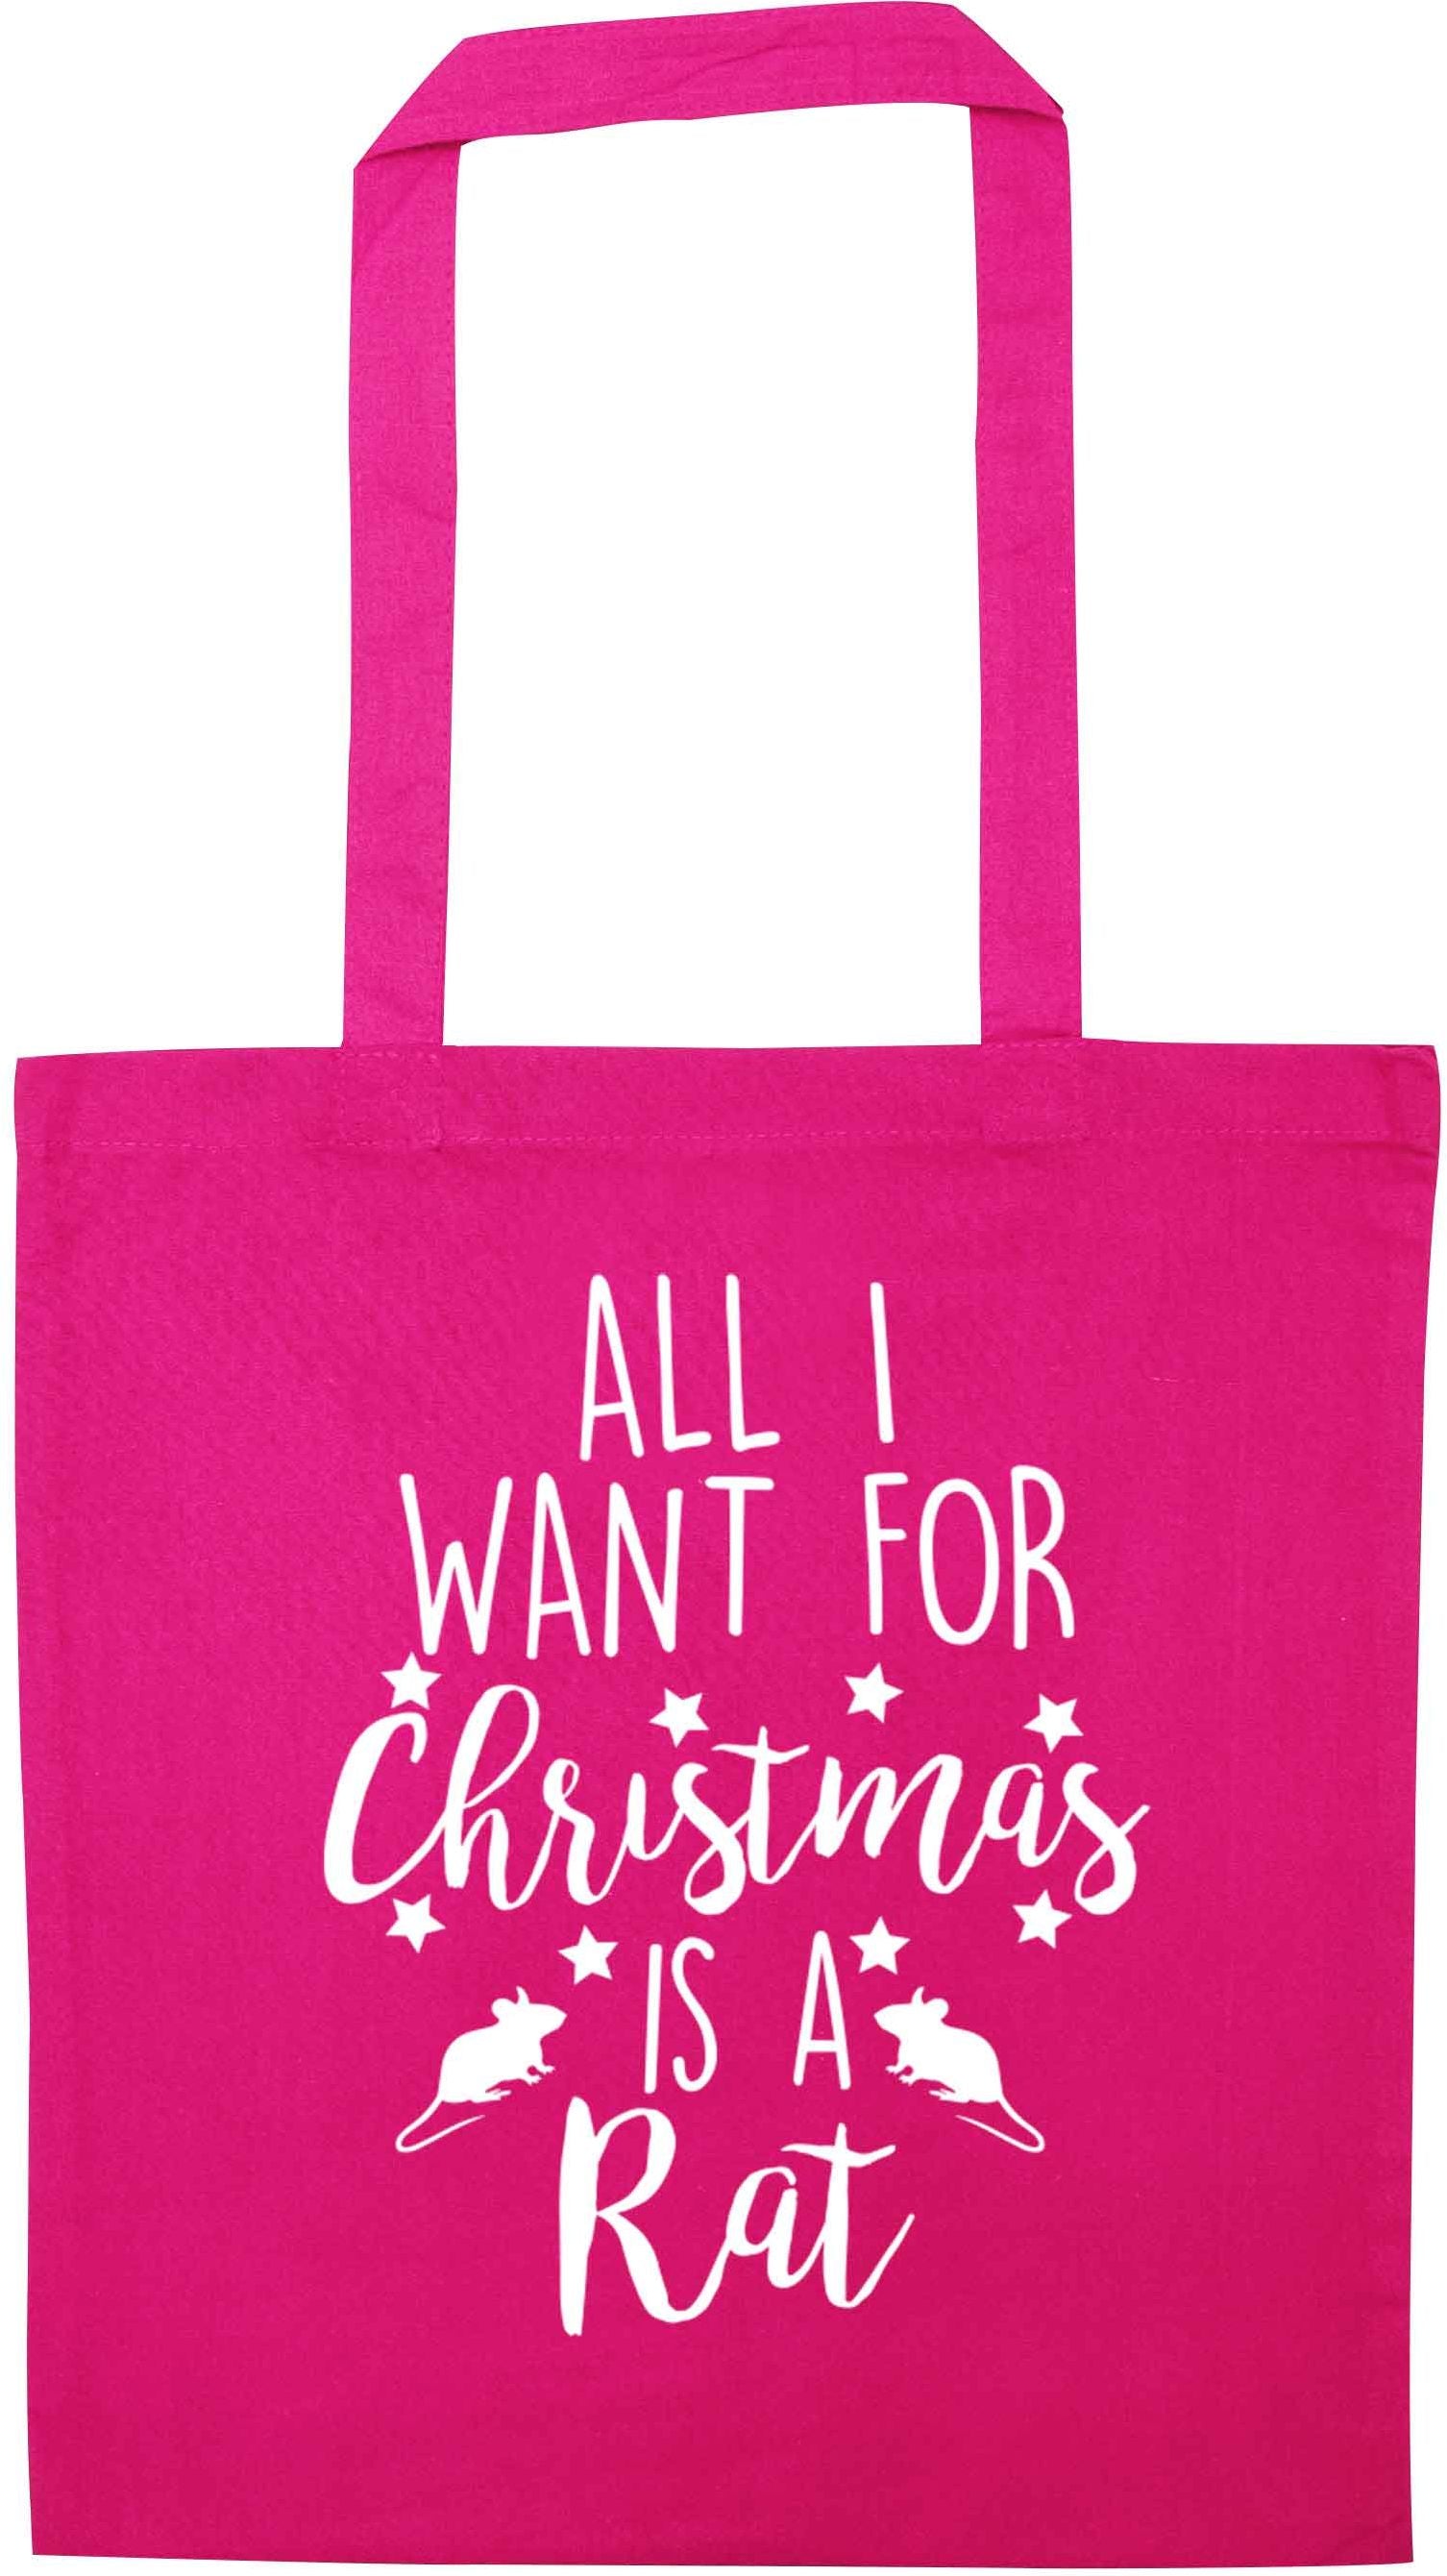 All I want for Christmas is a rat pink tote bag